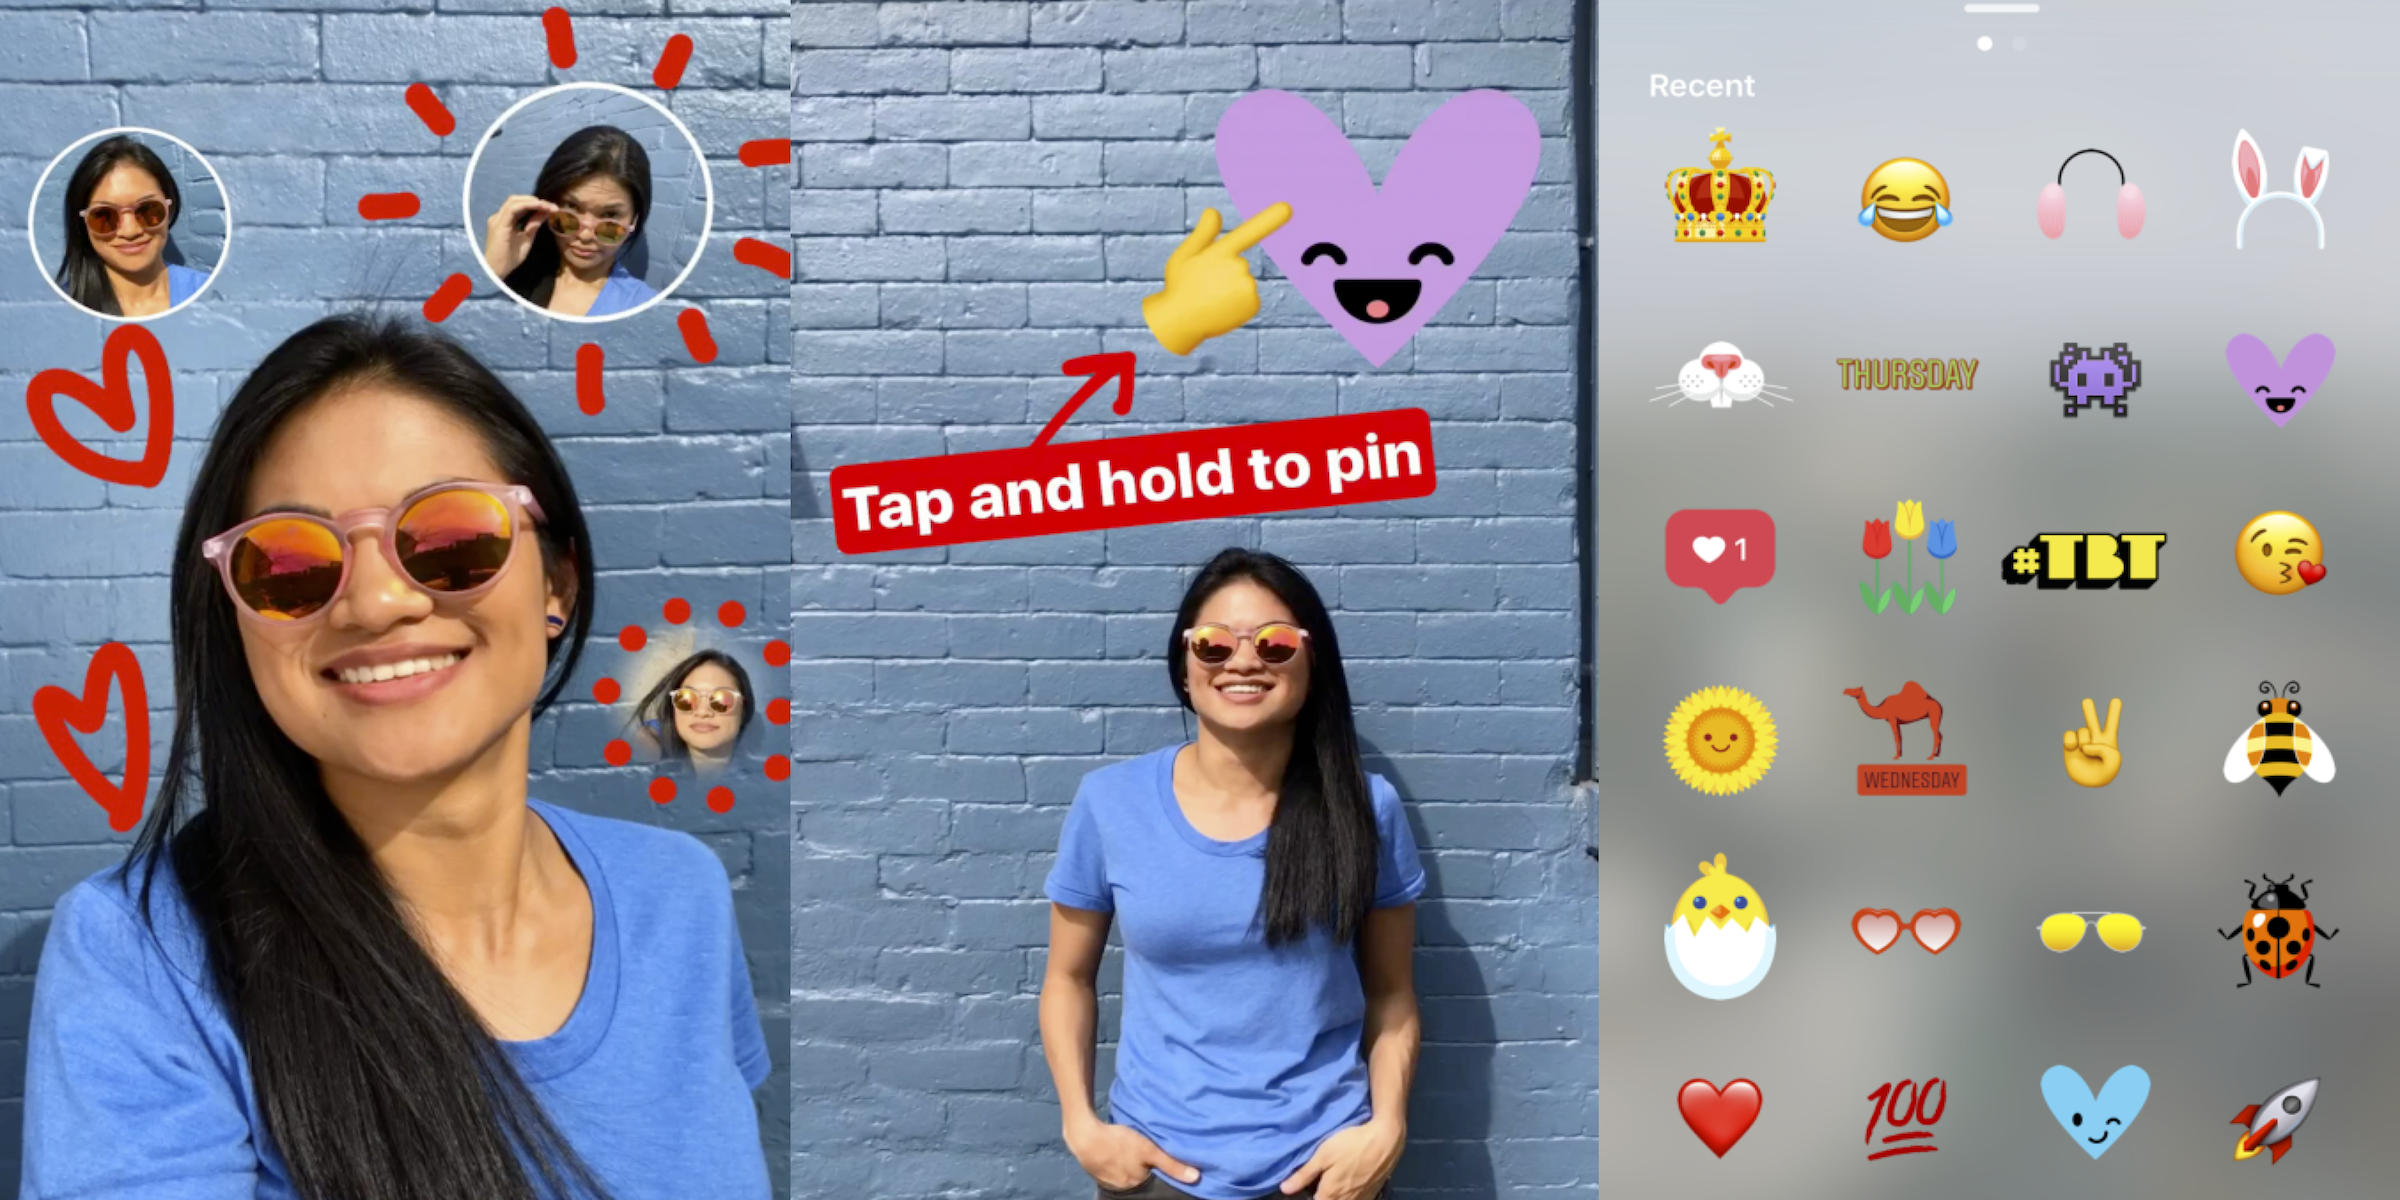  Instagram  Stories adds new  features for stickers  now at 